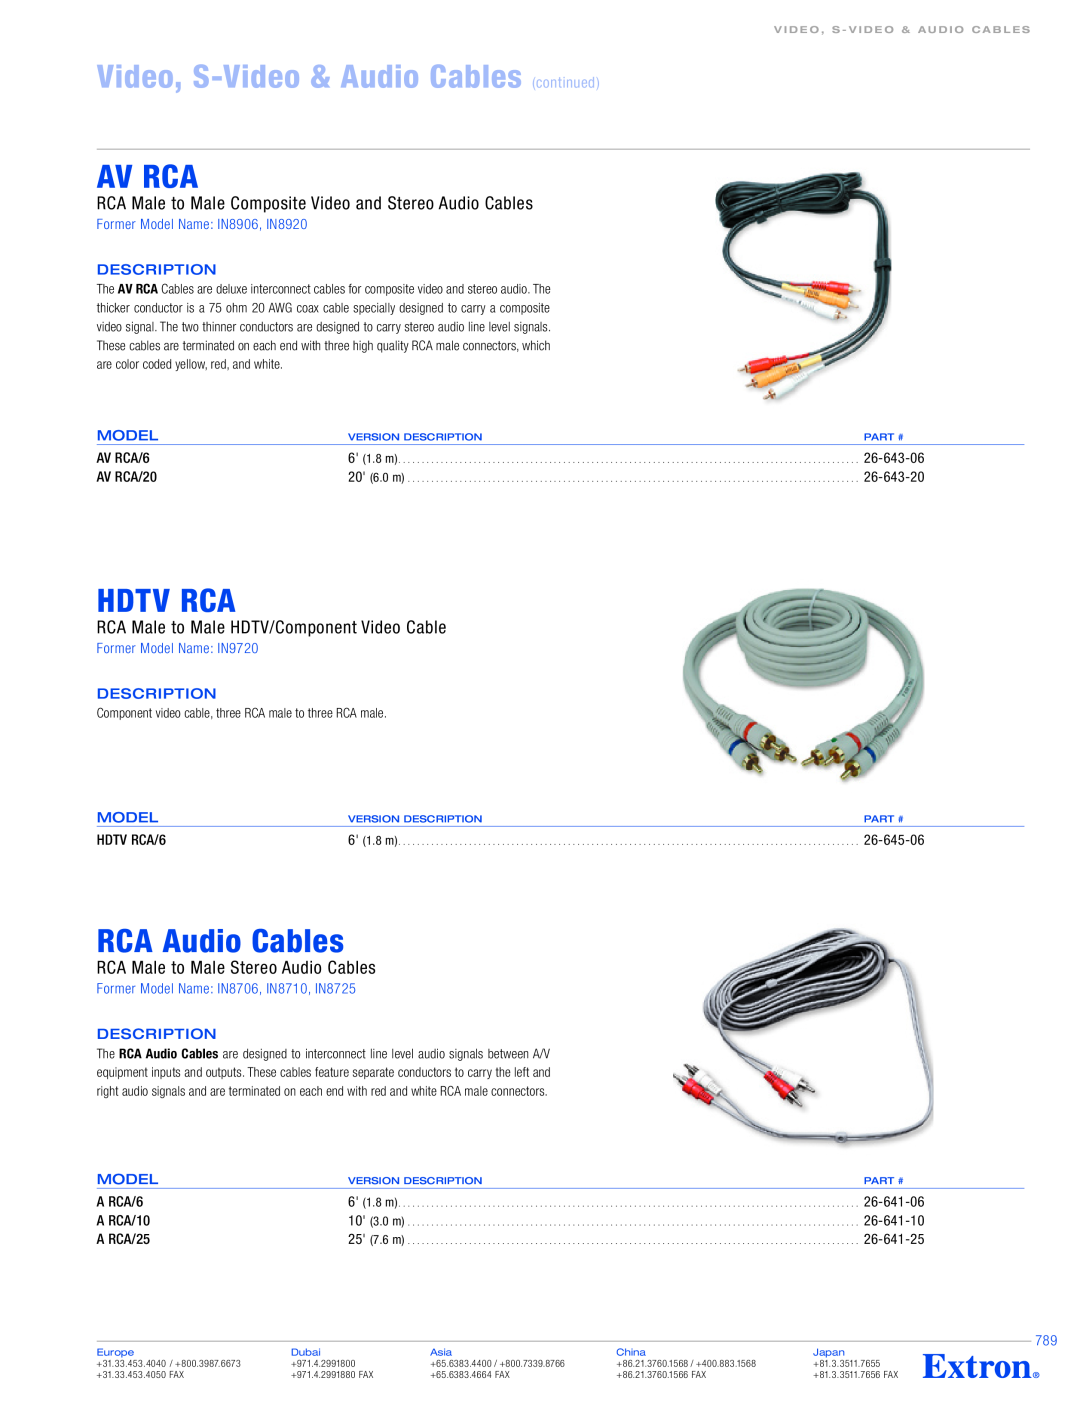 Extron electronic AV RCA/6 specifications Video, S-Video& Audio Cables continued, Av Rca, Hdtv Rca, RCA Audio Cables 